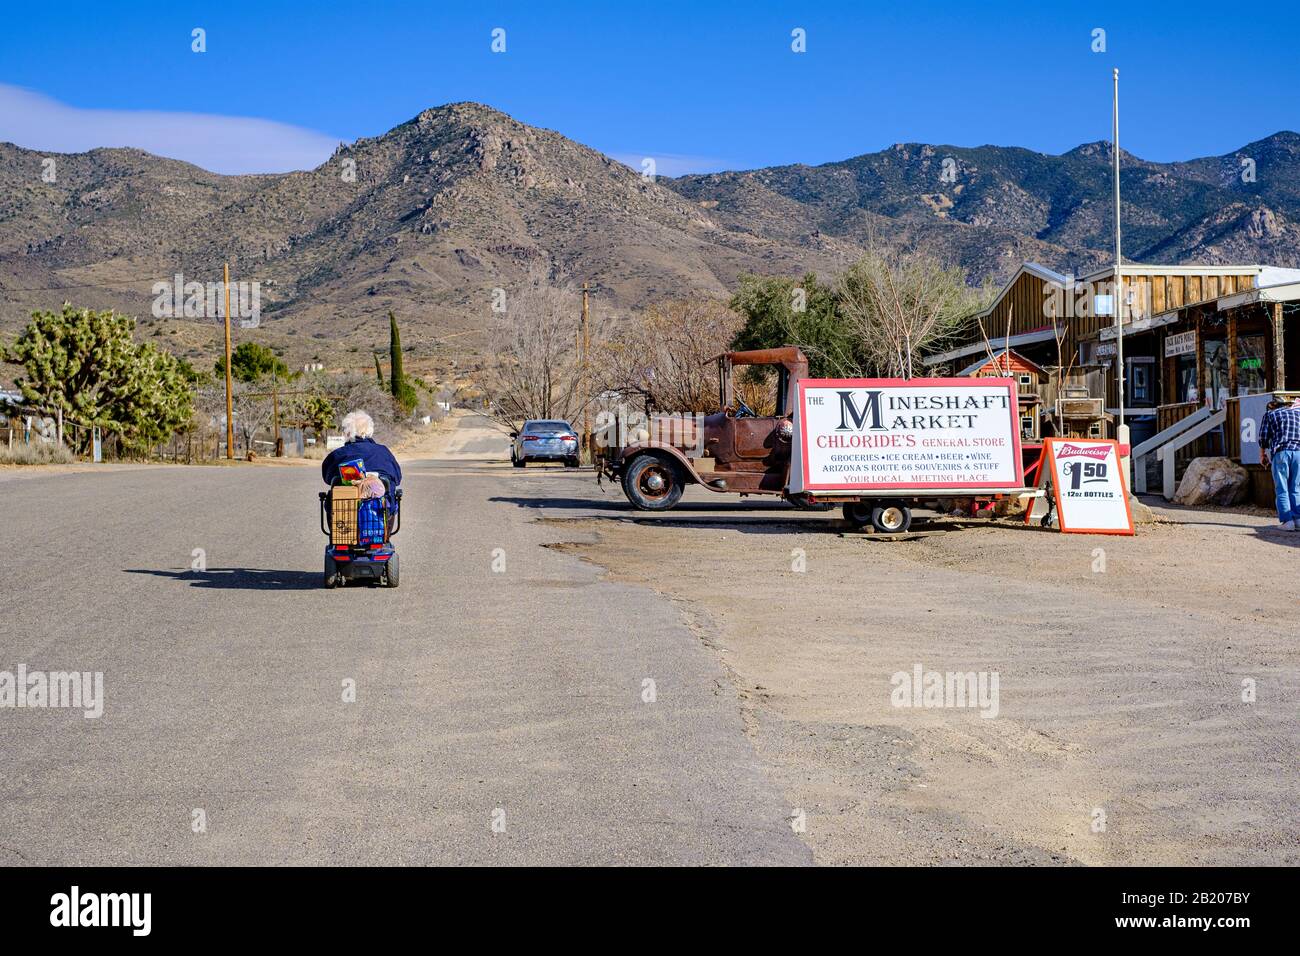 Mobility scooter driving in centre of desert road near store at Chloride, Arizona, 86431, USA. Stock Photo